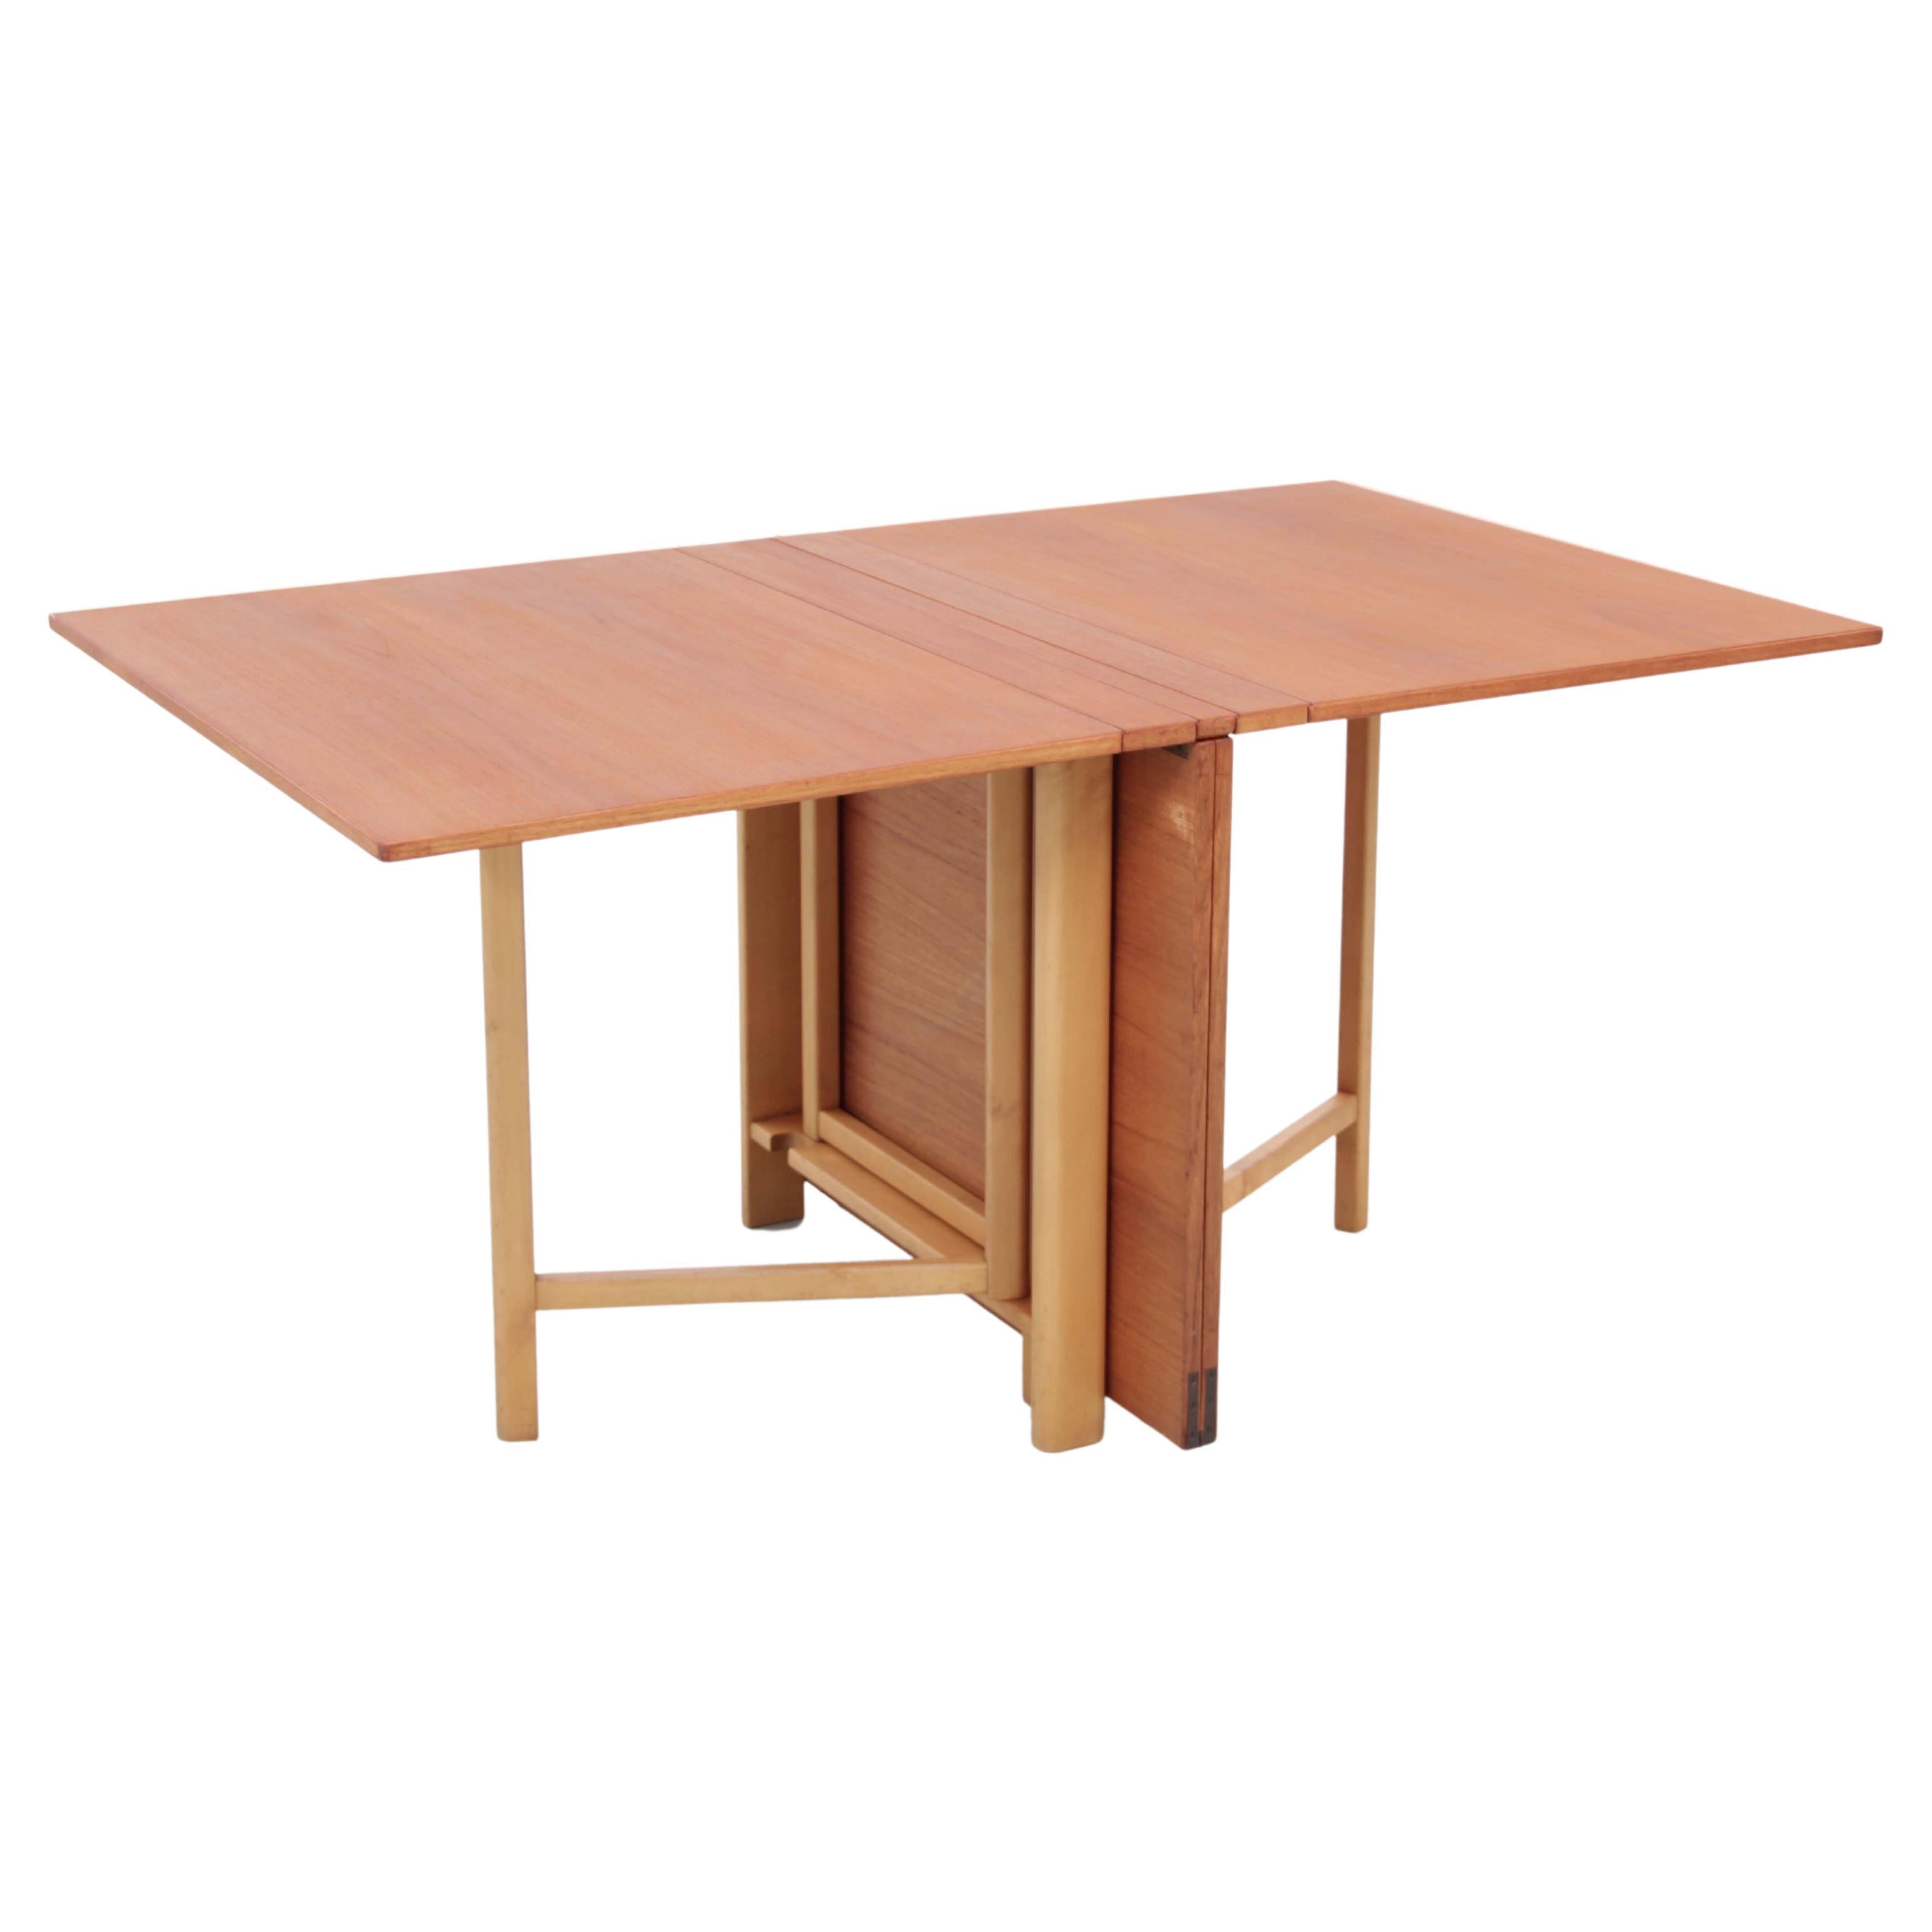 Mid-Century Modern Dining Table “Maria Flap” by Bruno Mathsson for Mathsson